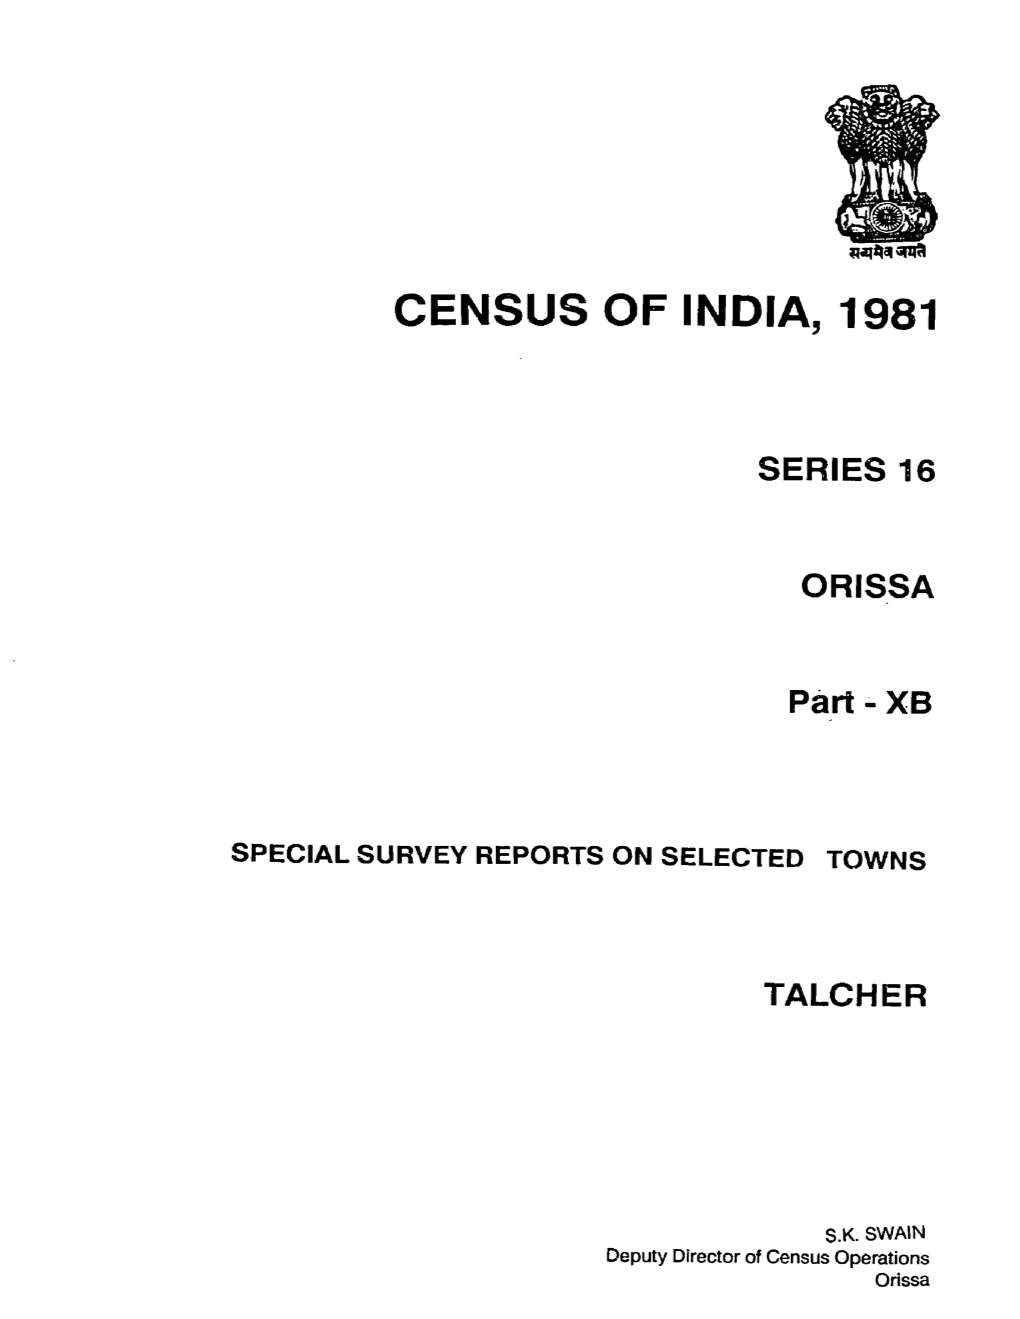 Special Survey Reports on Selected Towns, Talcher, Part-XB, Series-16